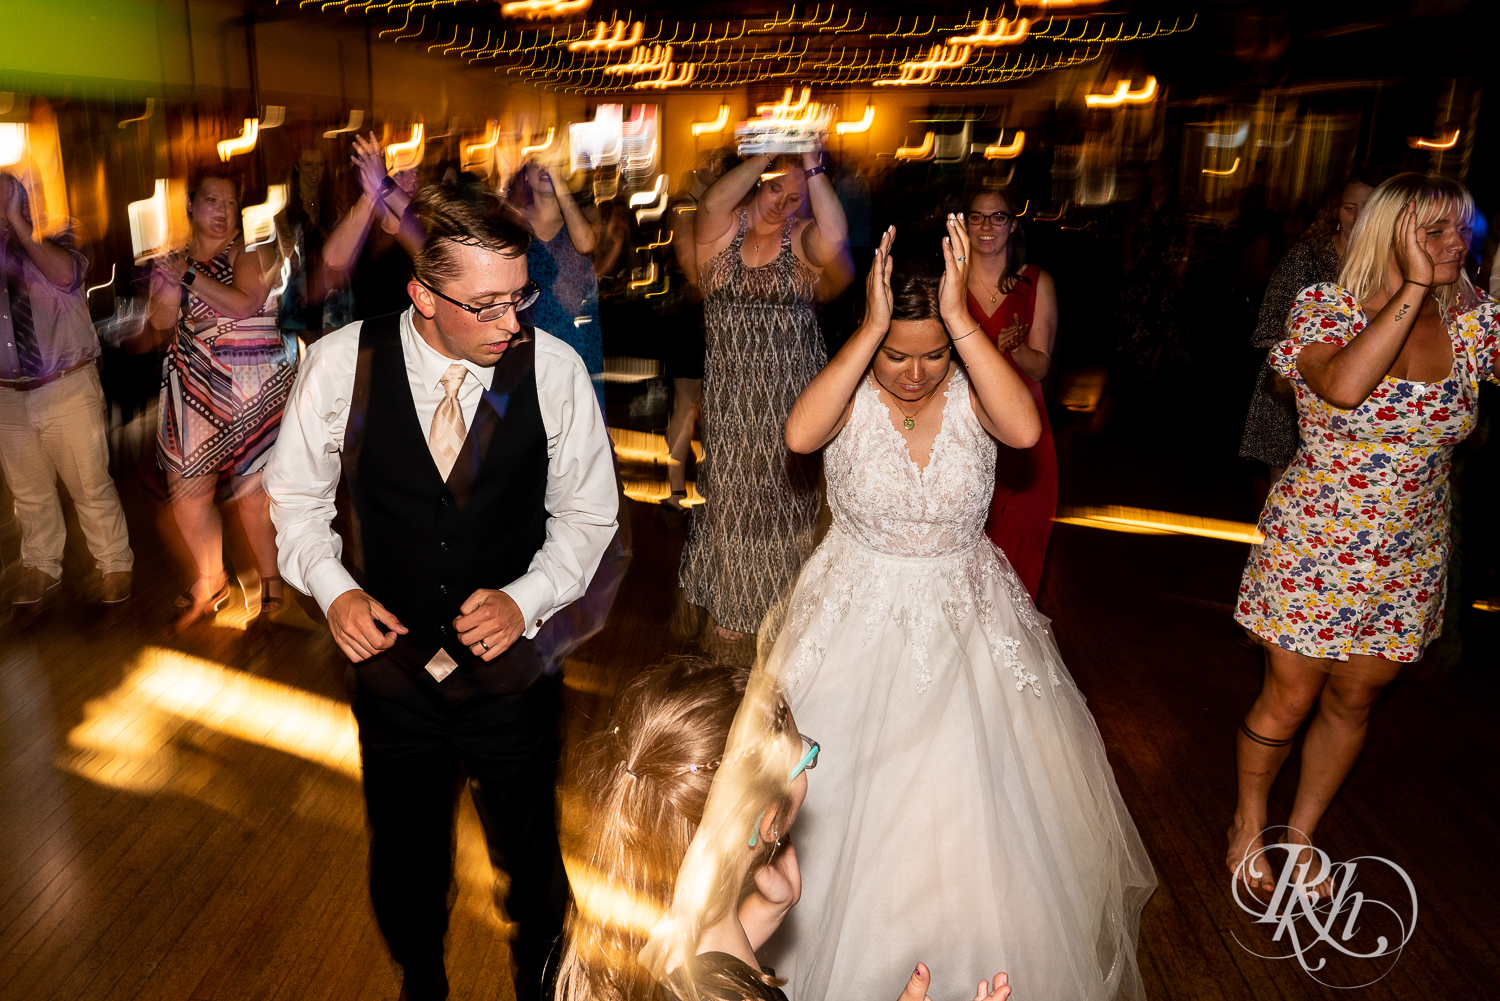 Guests dance with bride and groom at wedding reception at Kellerman's Event Center in White Bear Lake, Minnesota.